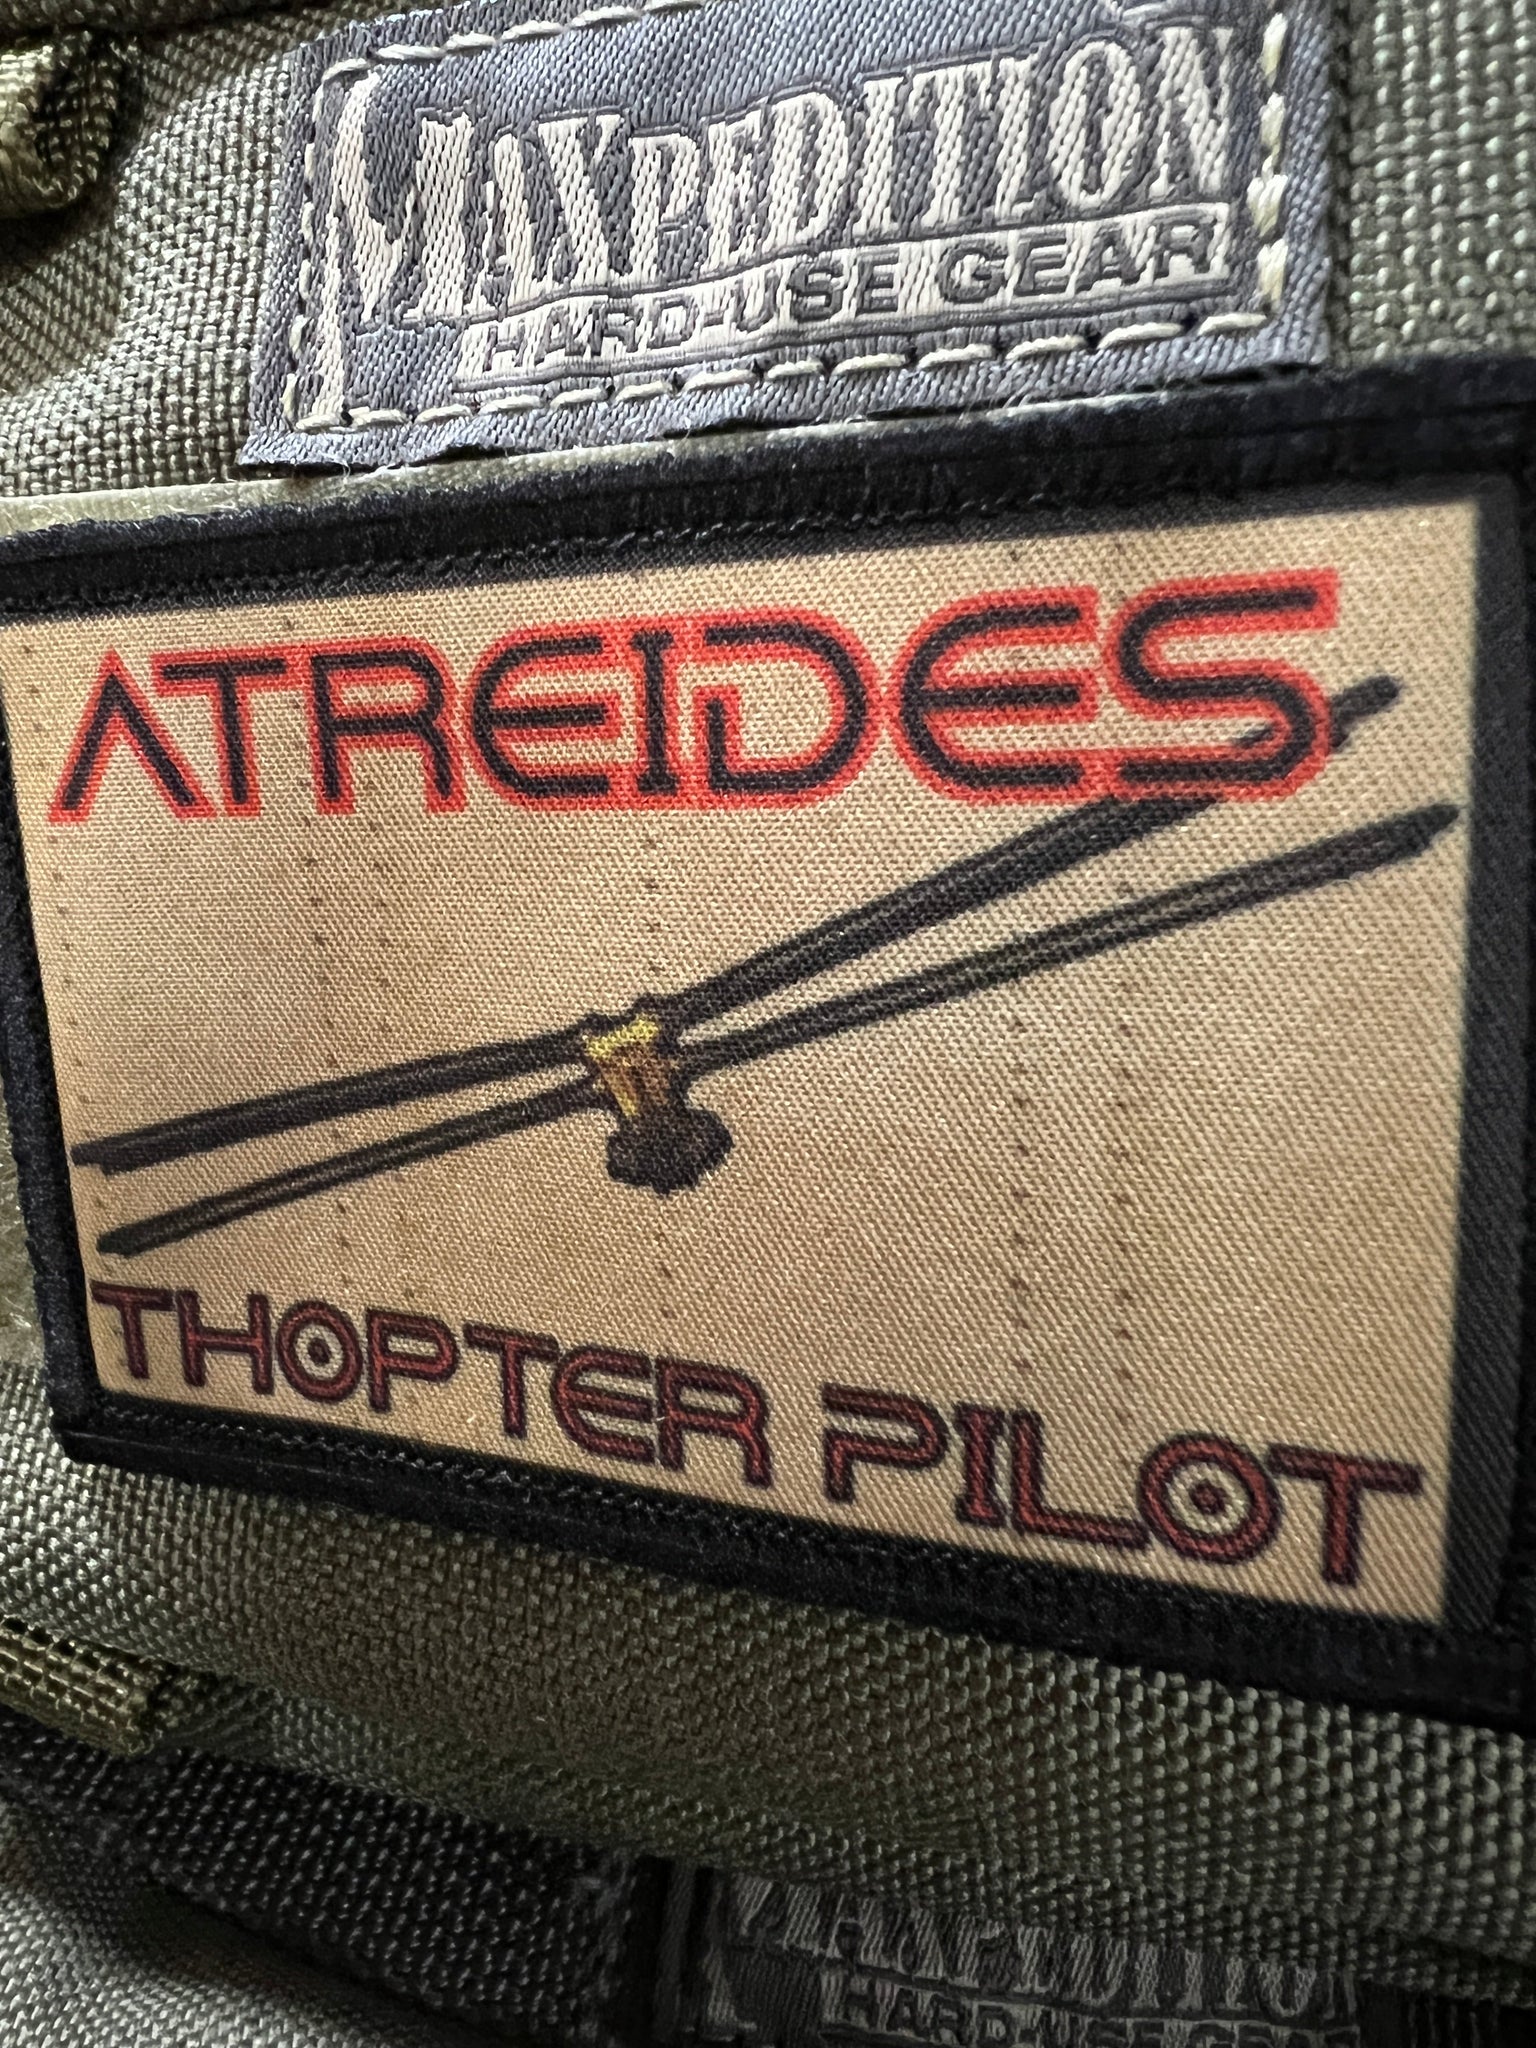 Dune Atreides Thopter Pilot Morale Patch Morale Patches Redheaded T Shirts 